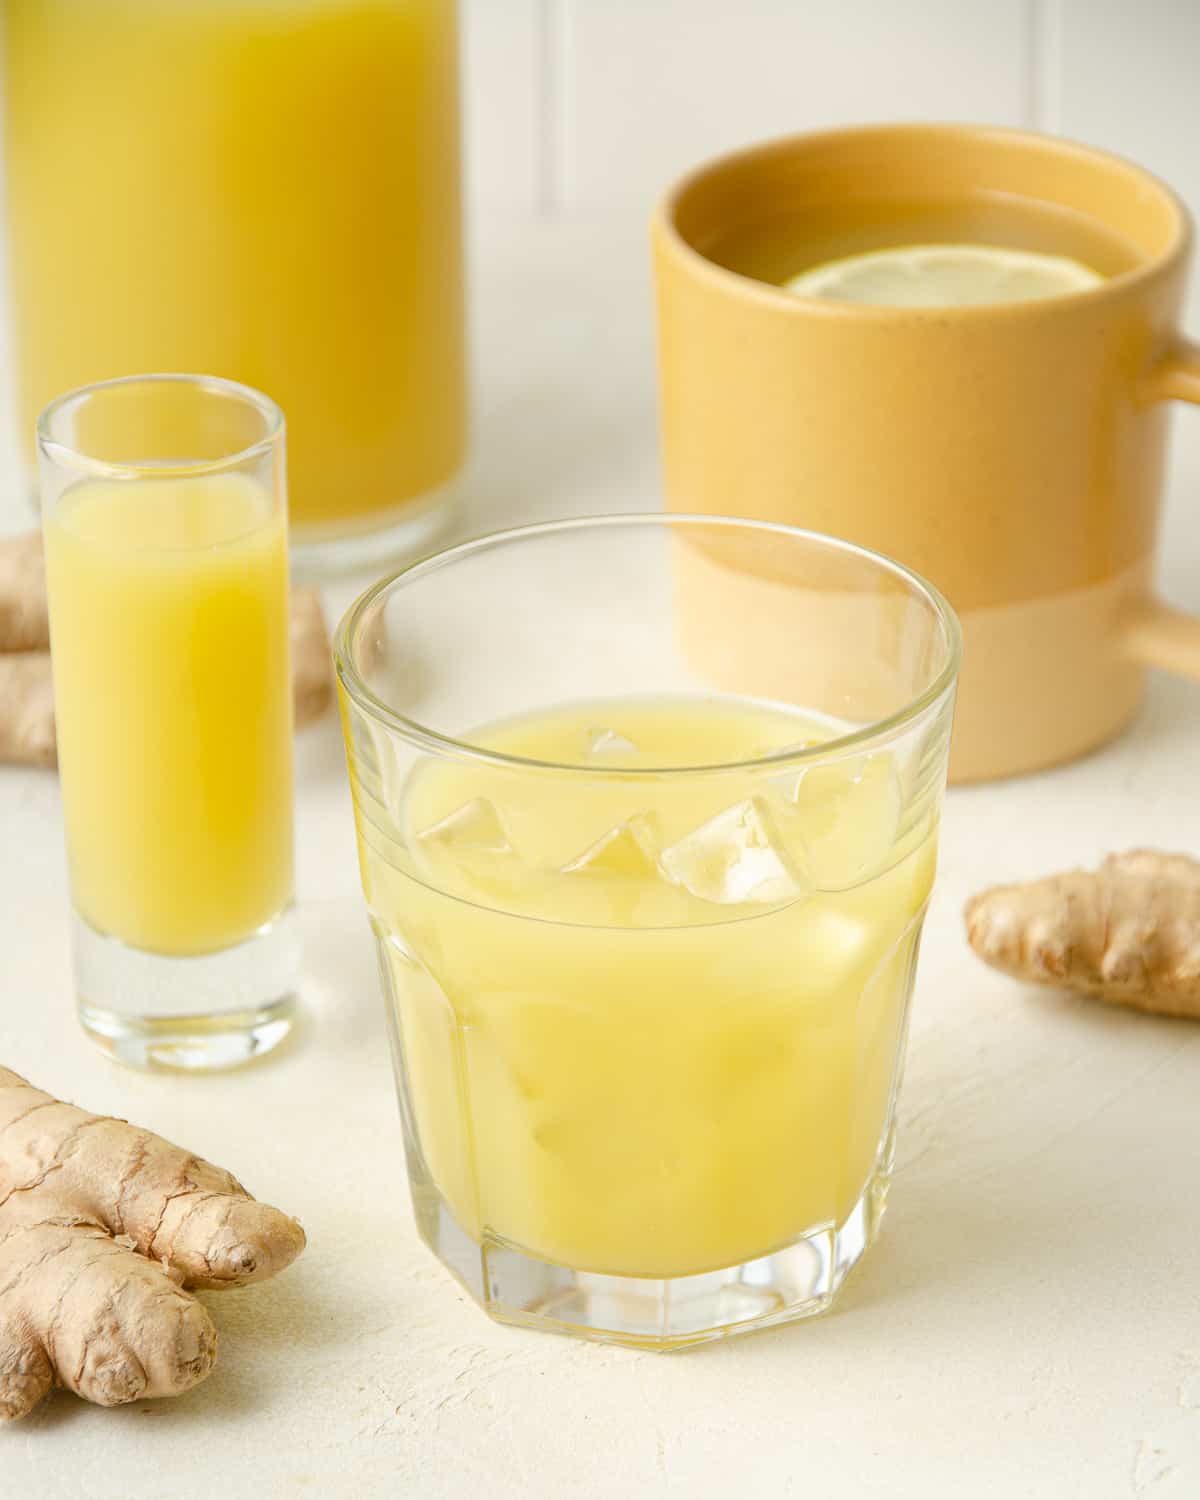 A glass of fresh ginger juice with ice, next to a shot of ginger juice and a mug of ginger tea.